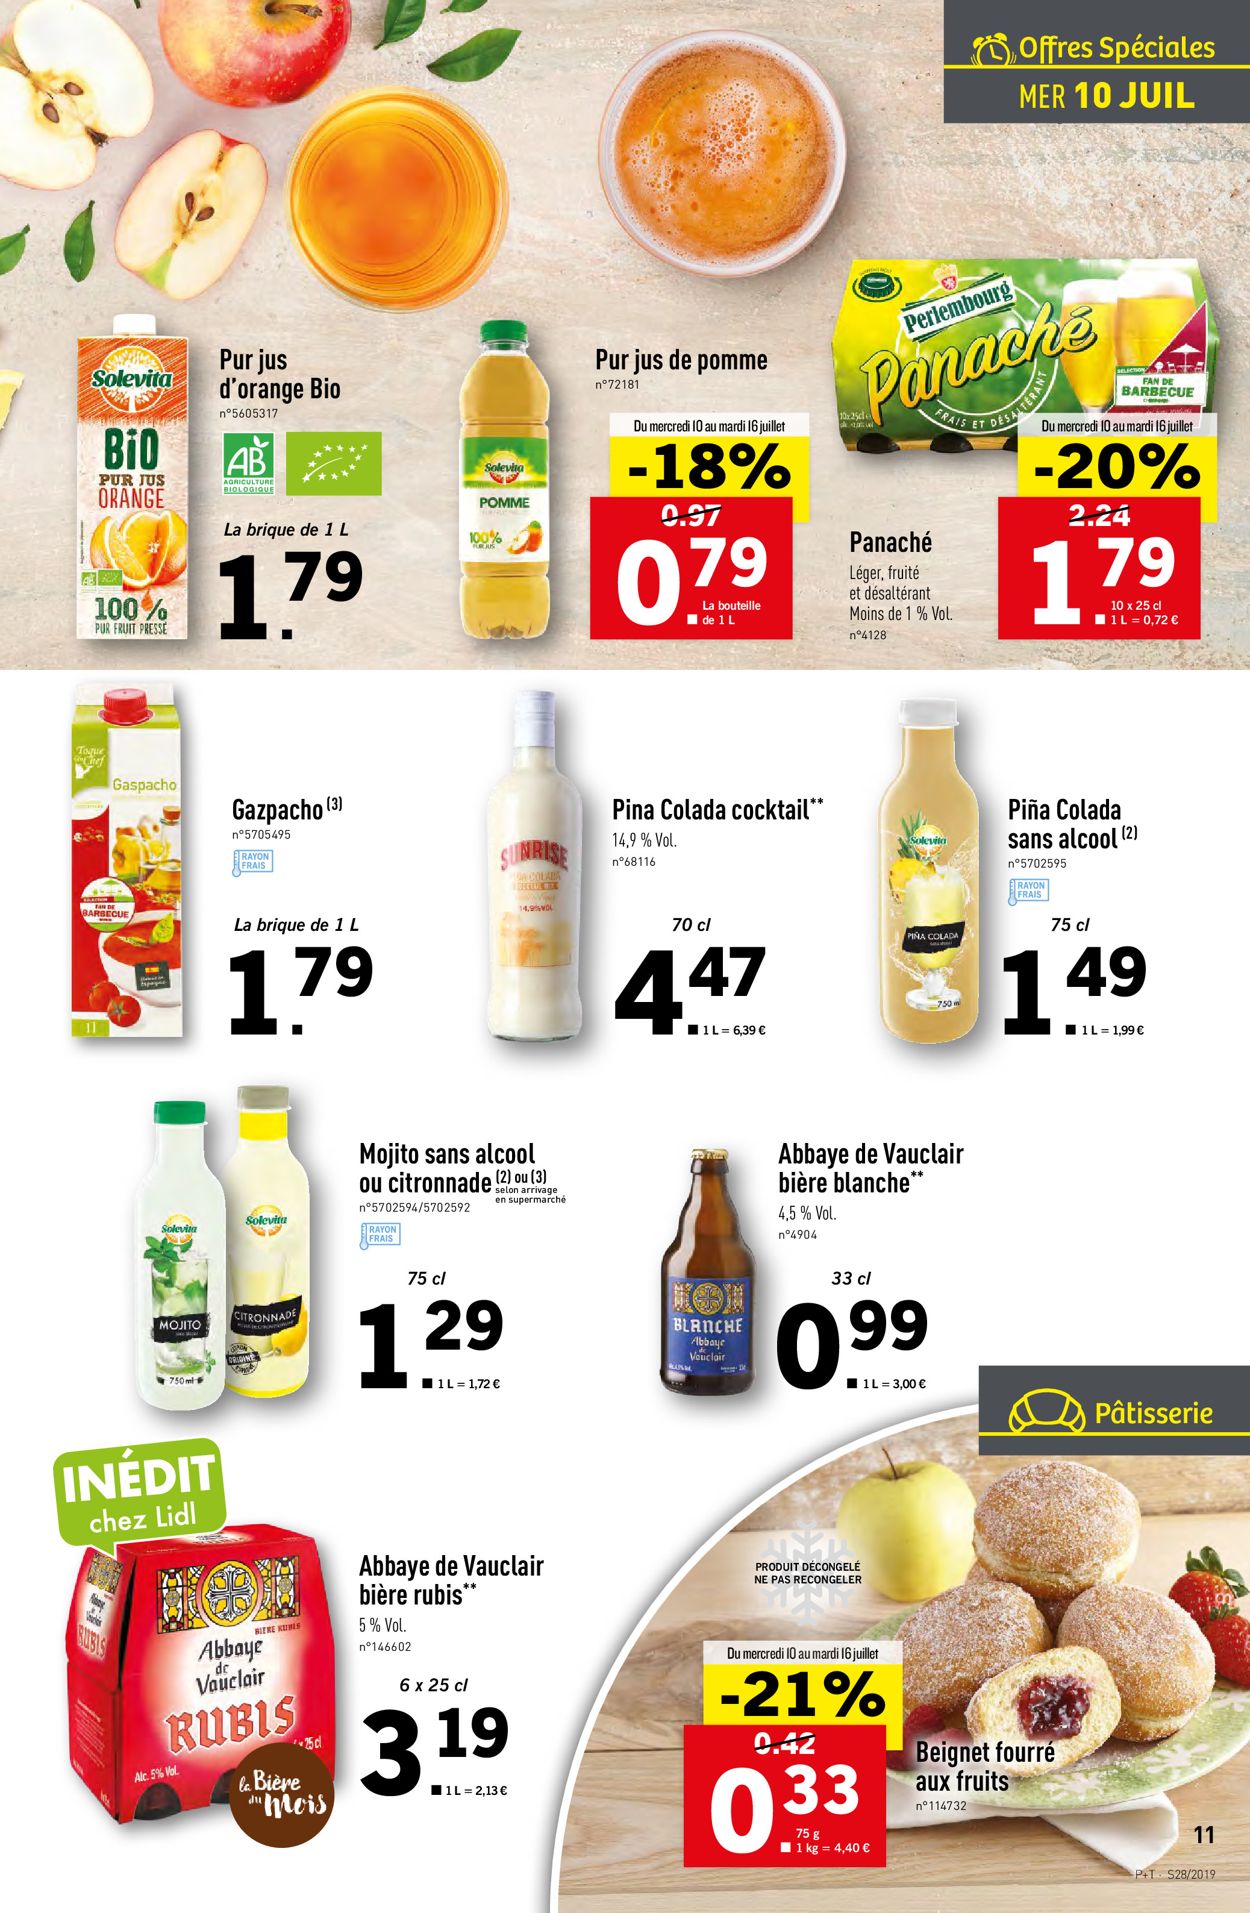 Lidl Catalogue - 10.07-16.07.2019 (Page 11)